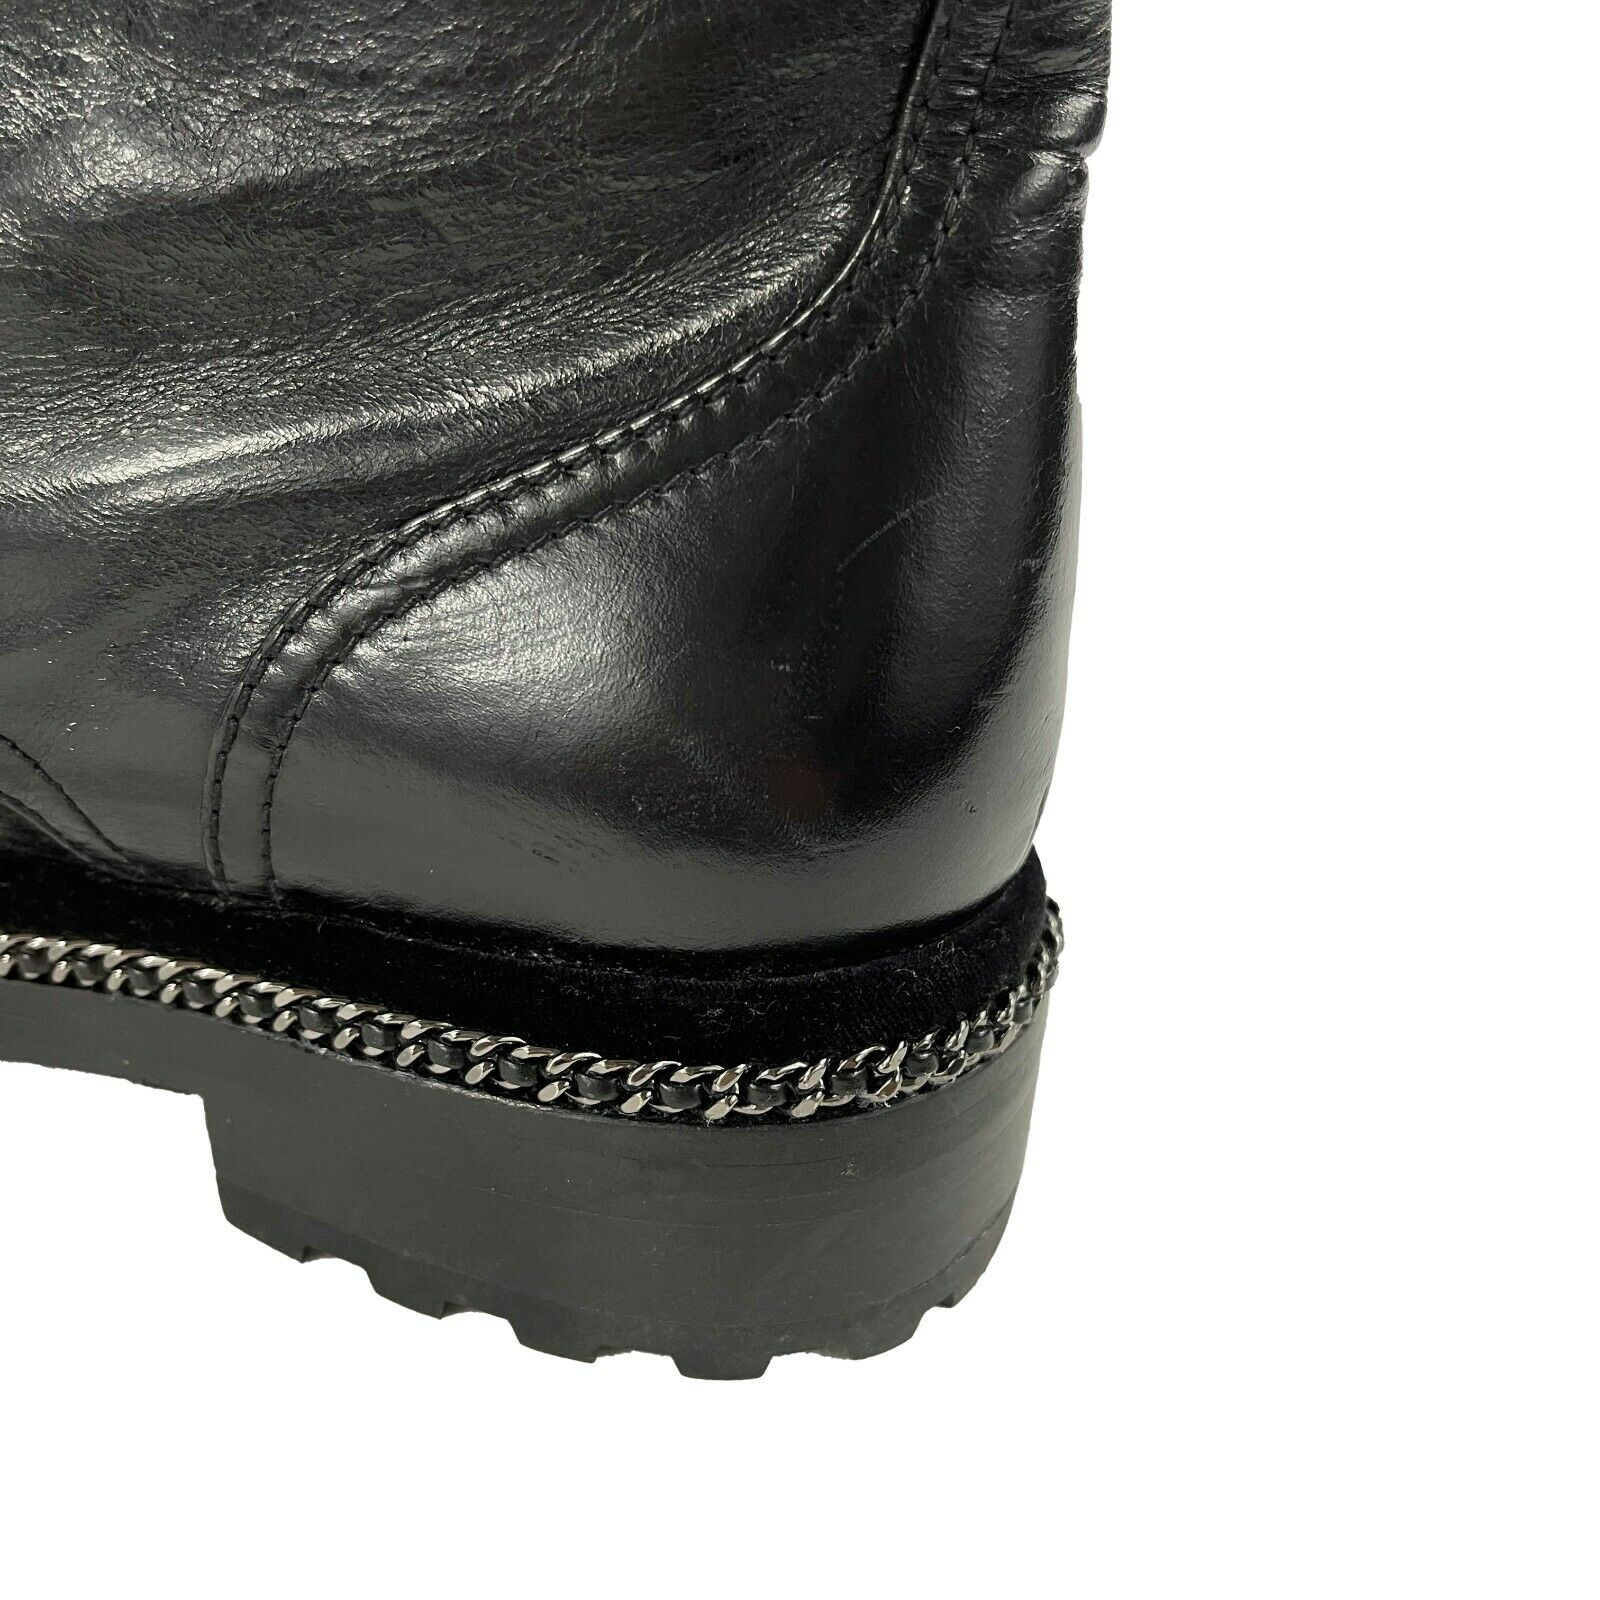 CHANEL Black Leather Combat Boots with Trim and Faux Pearl CC Details -  BougieHabit